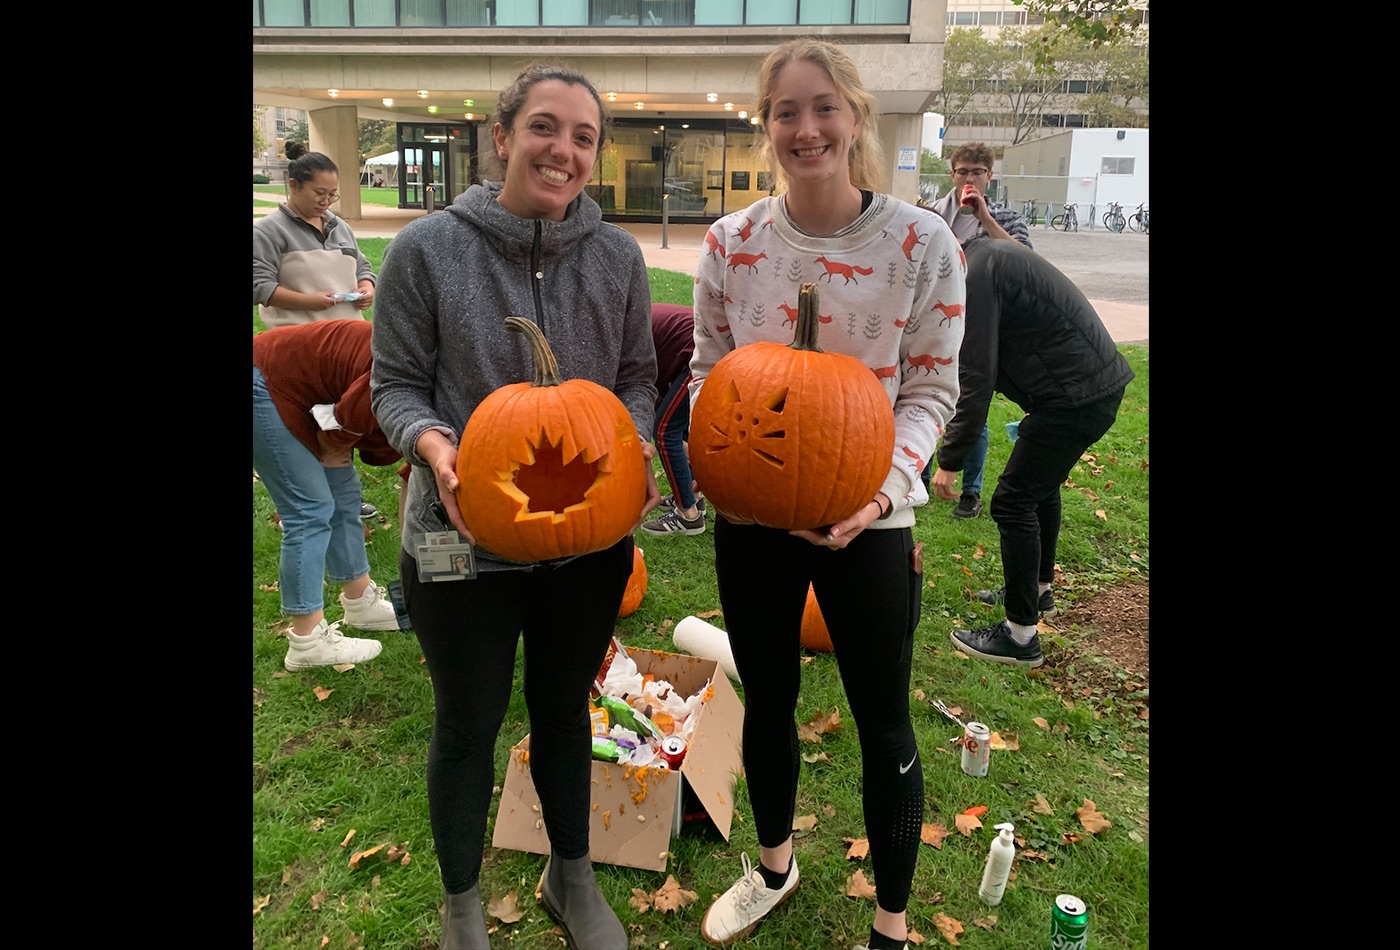 Two graduate students pose with their carved pumpkin